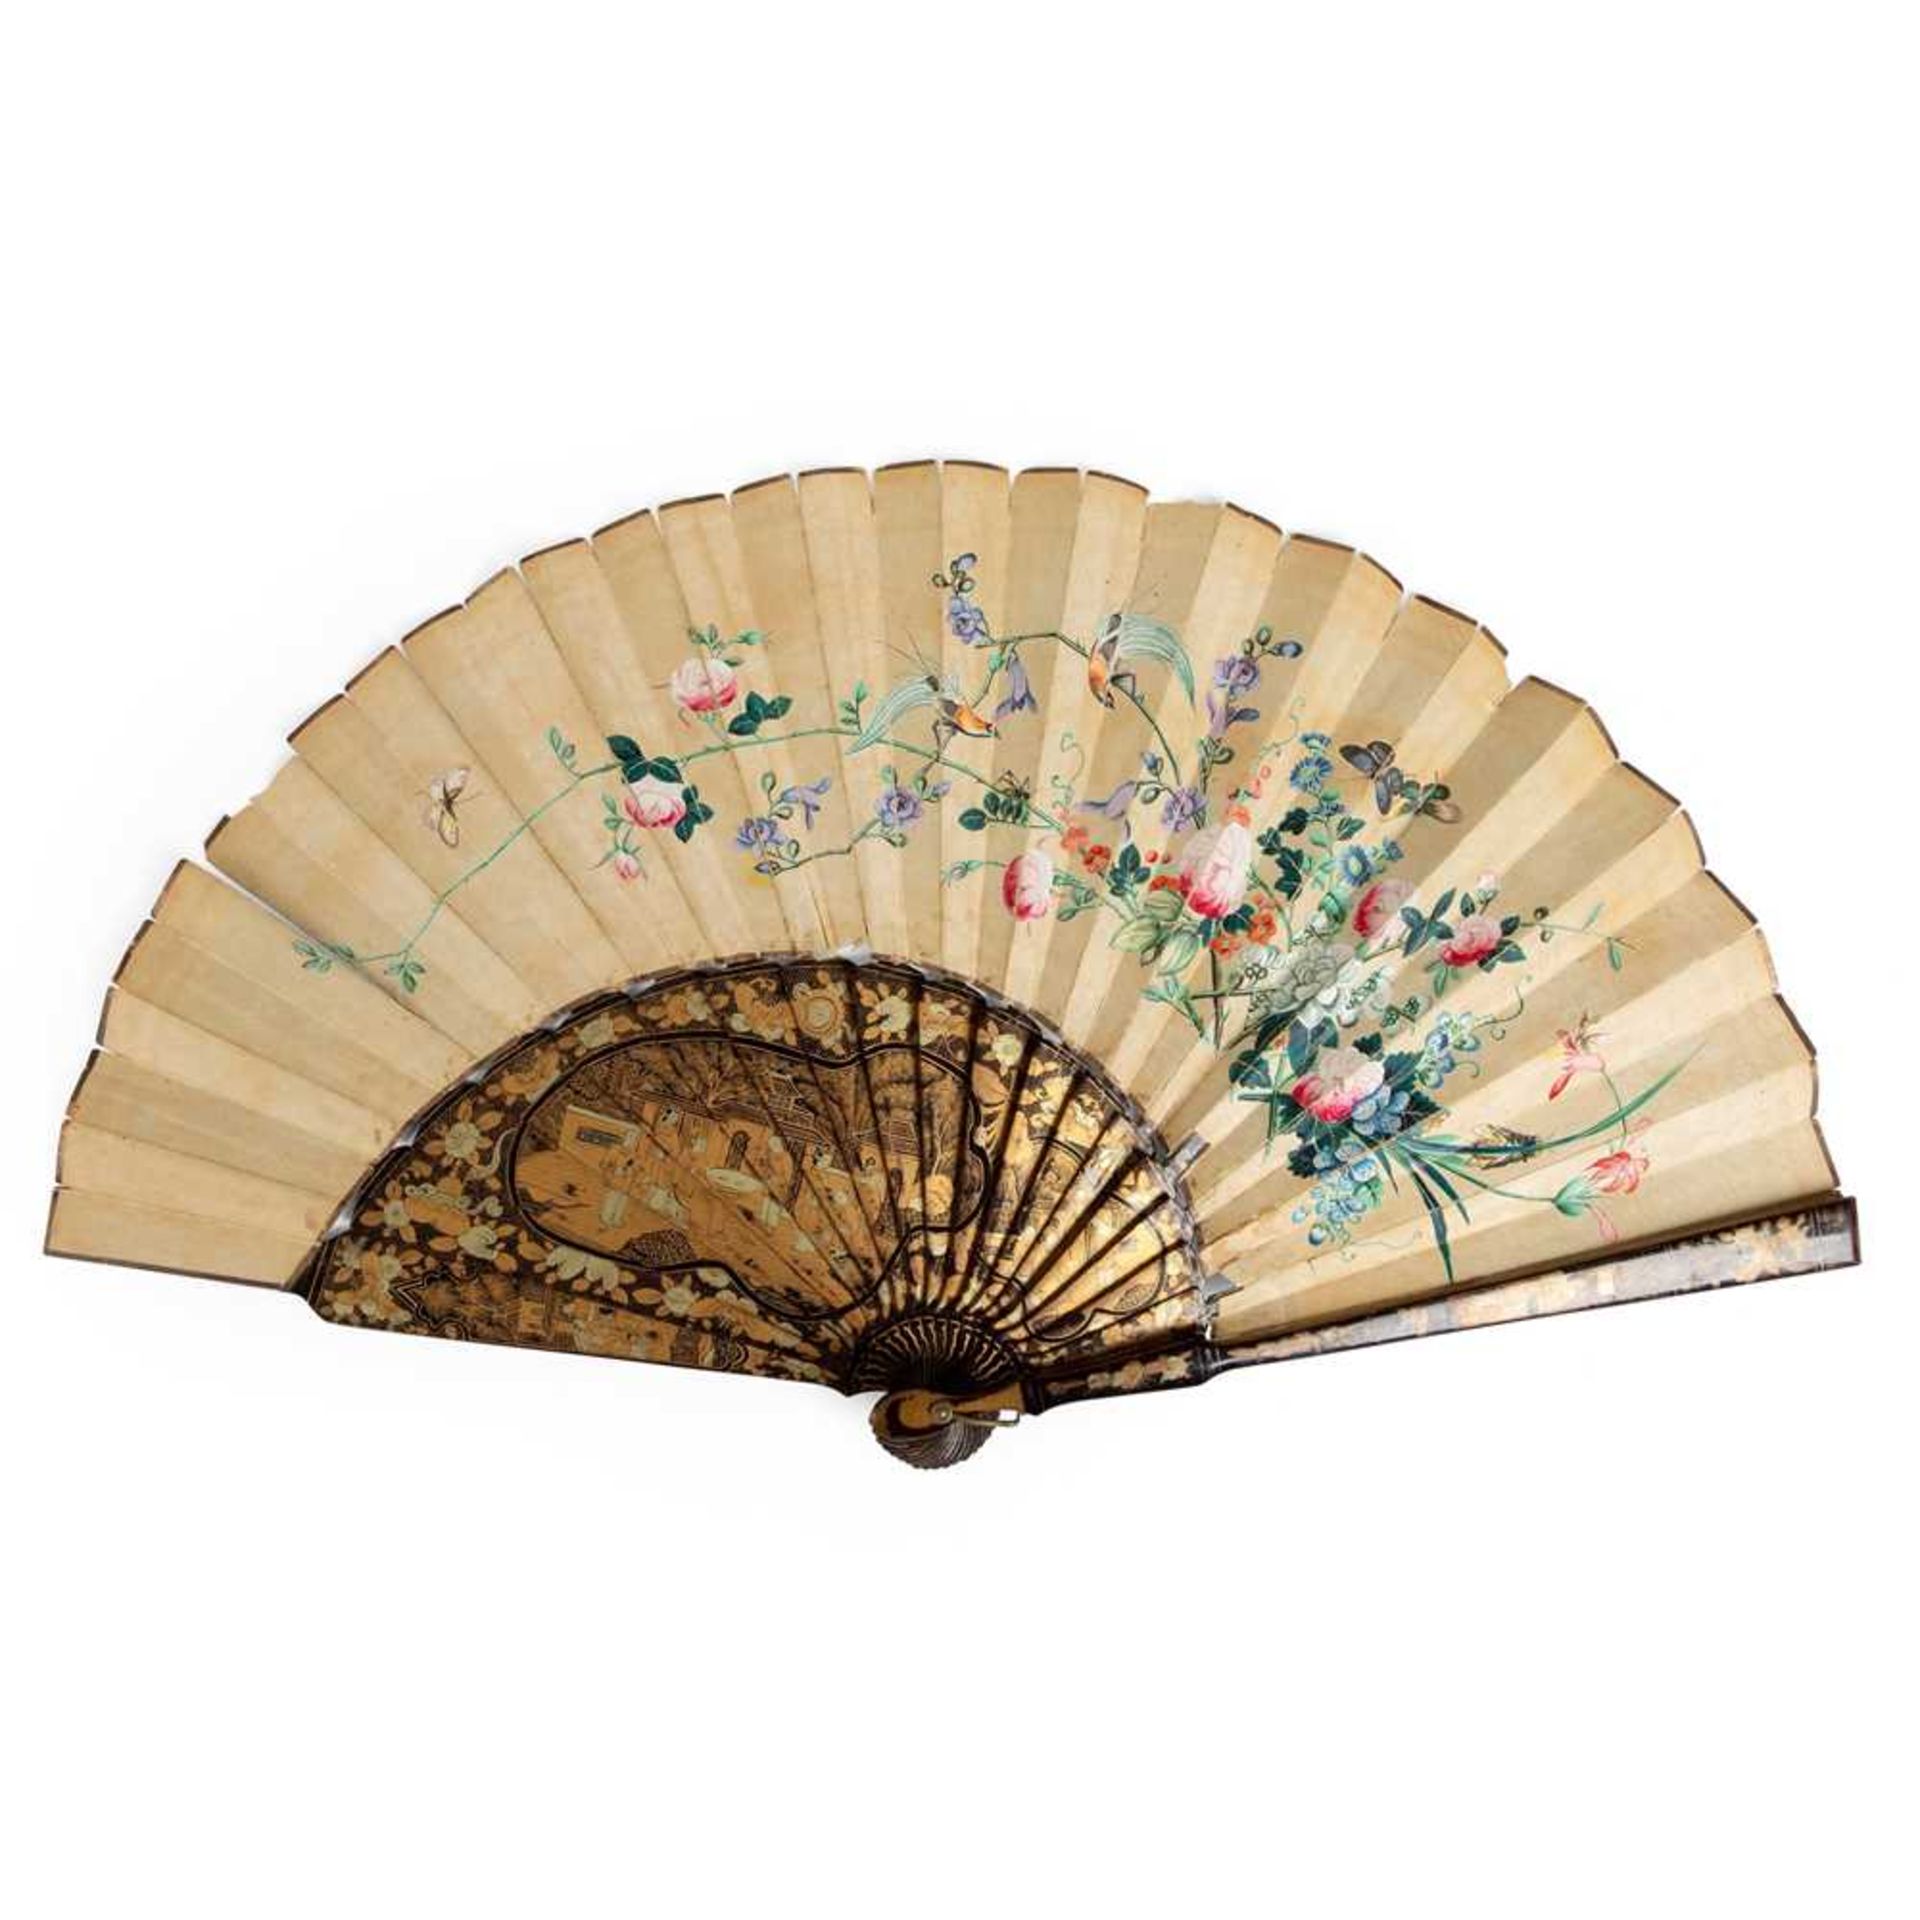 CANTON LACQUERED AND PAPER 'BIRDS AND FLOWERS' ARTICULATED FAN QING DYNASTY, MID-19TH CENTURY - Image 2 of 2